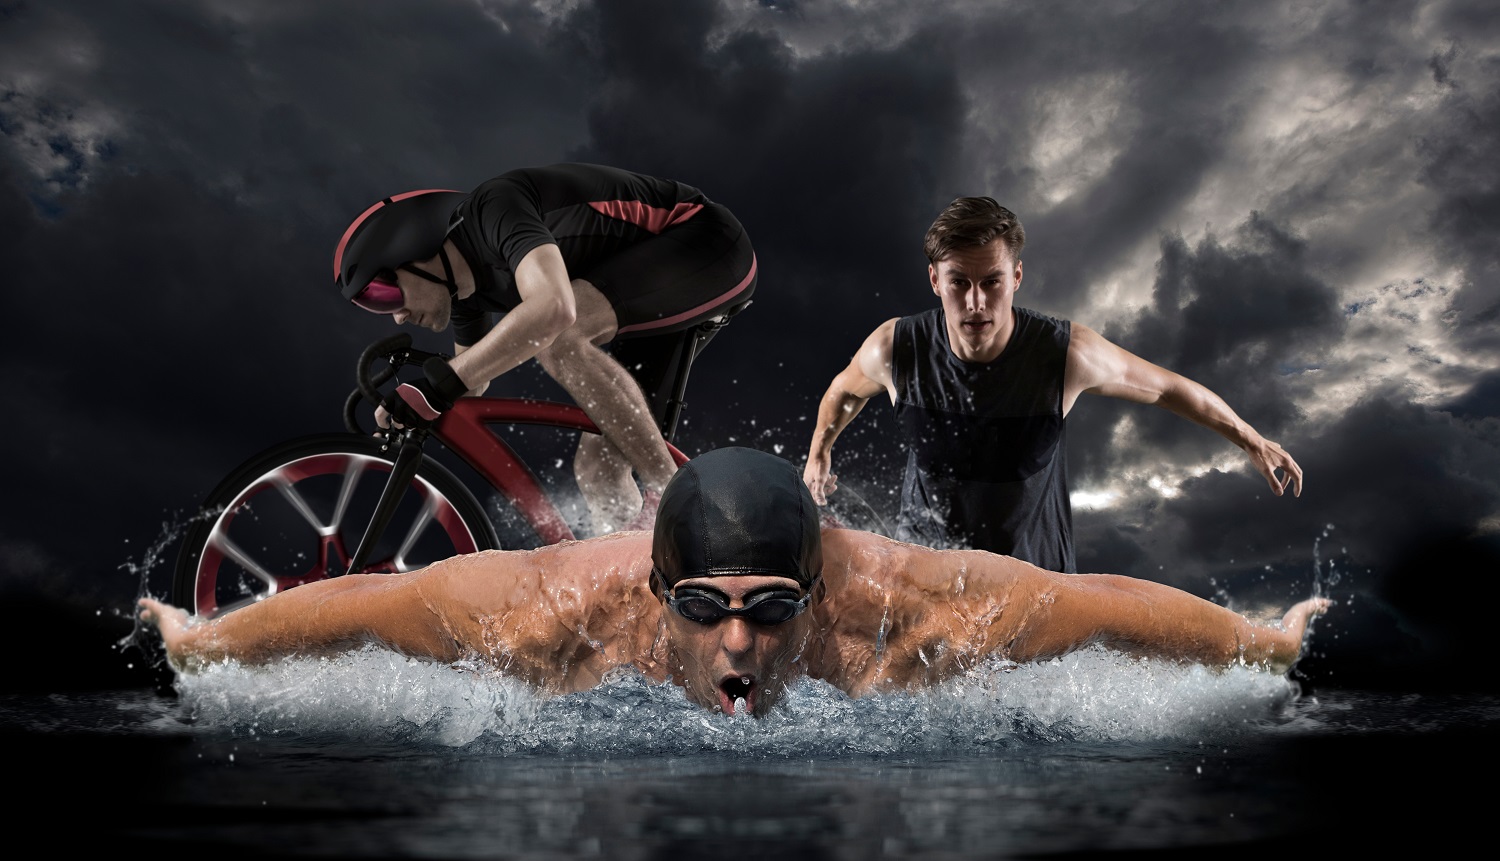 How To Get Into Triathlons